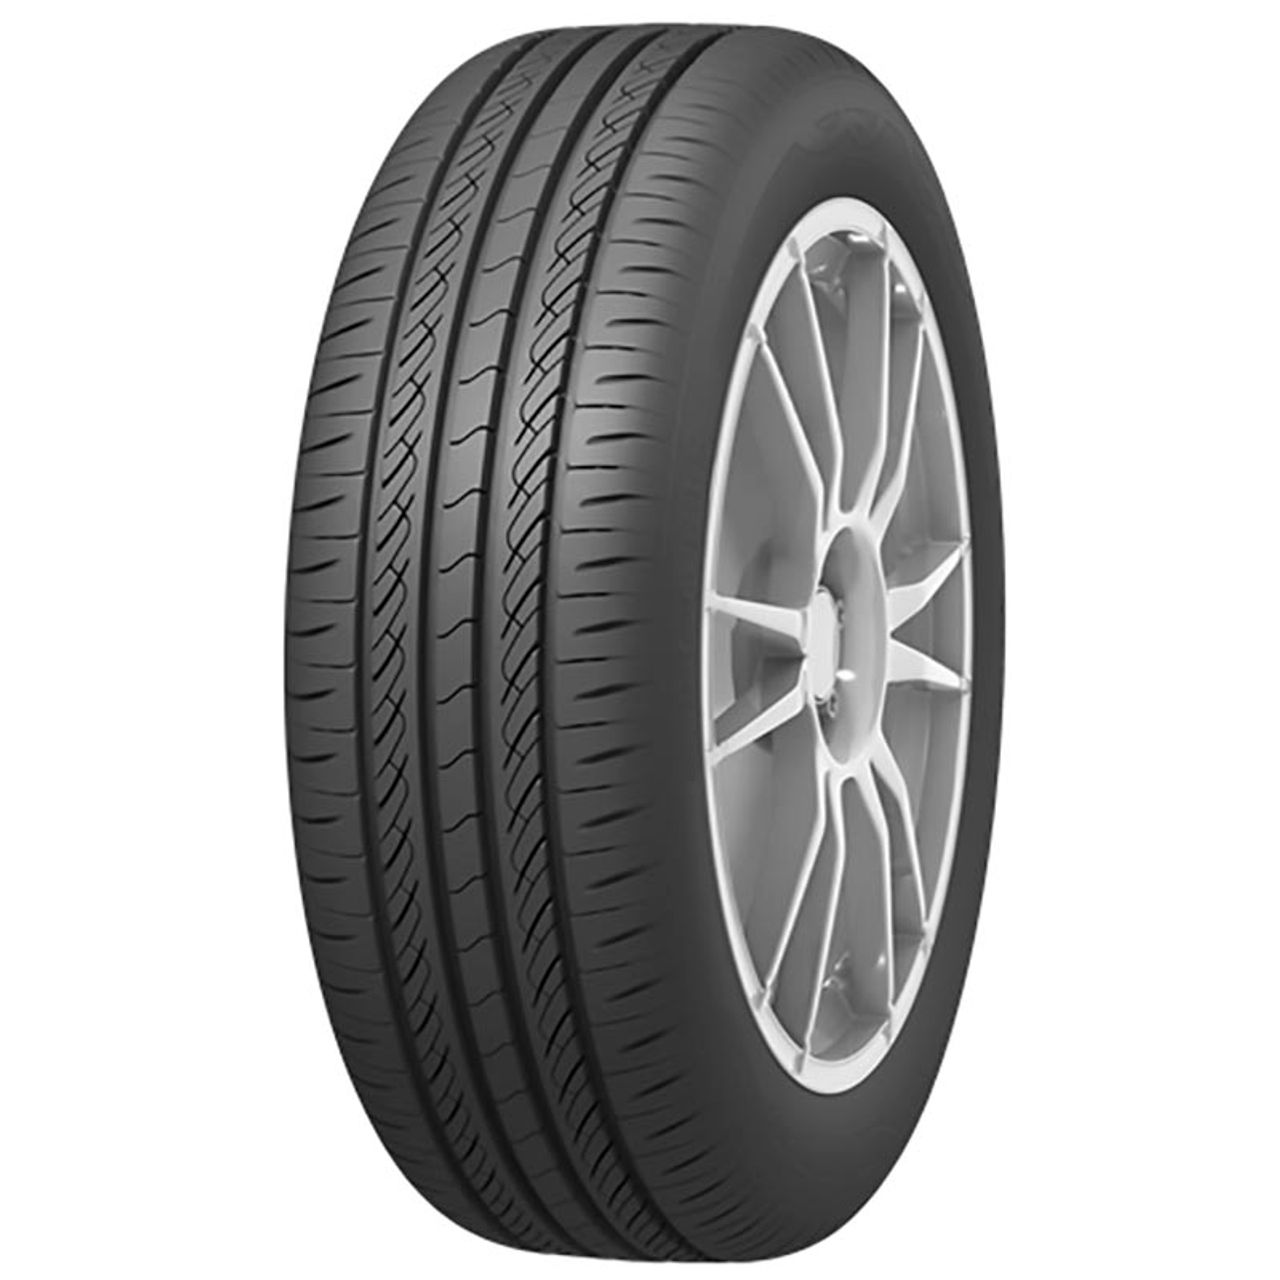 INFINITY ECOSIS 185/70R14 88T BSW